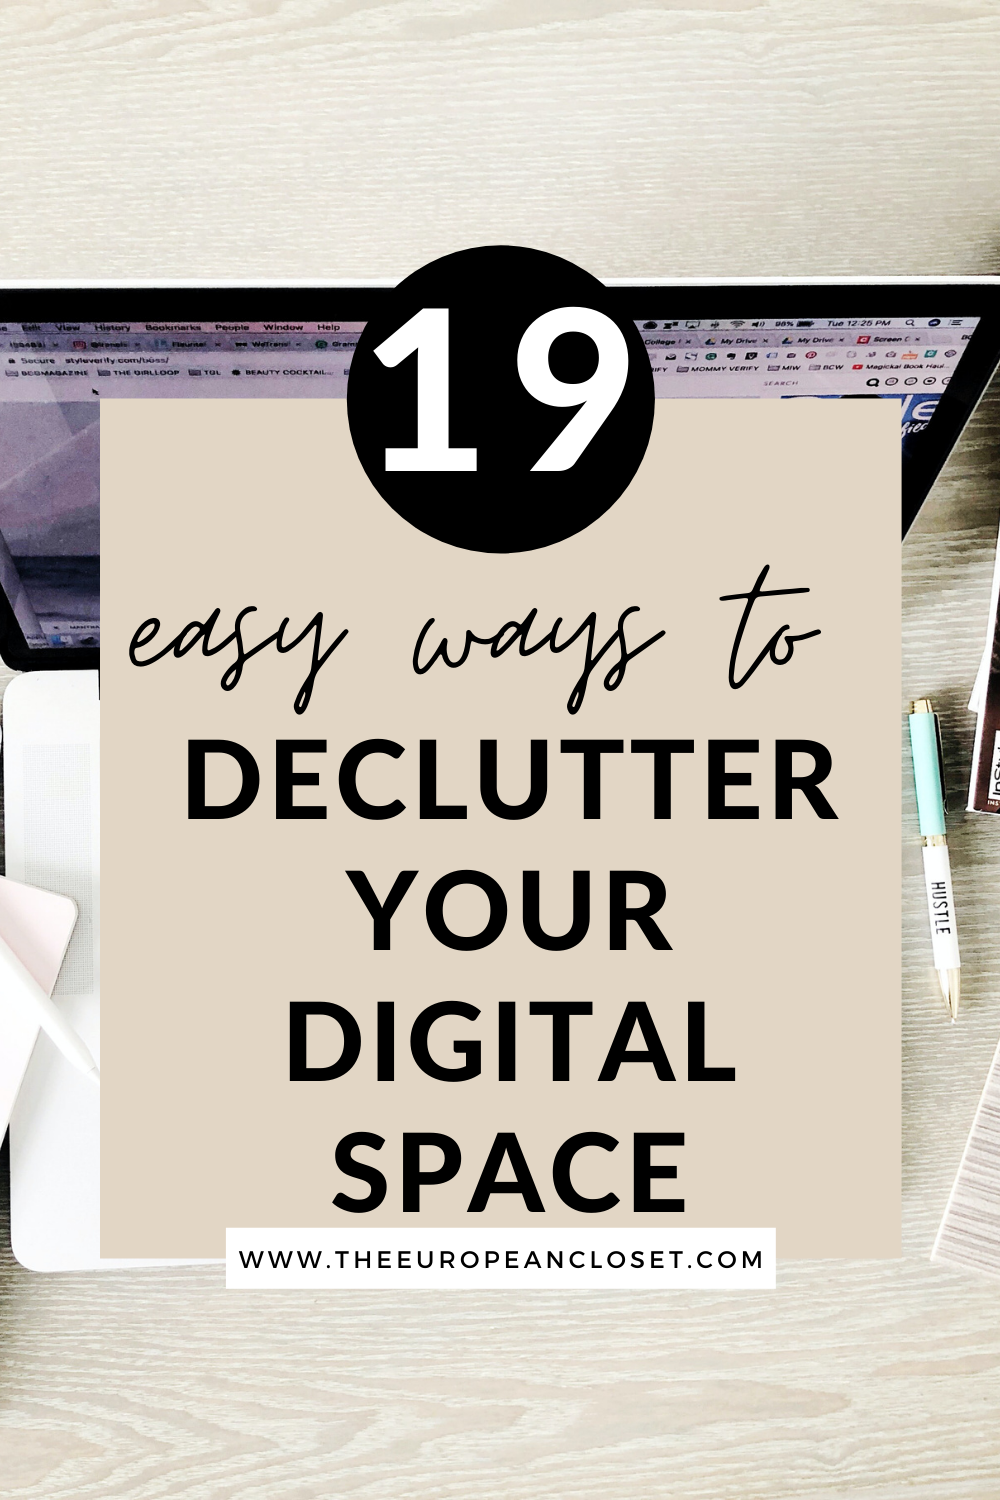 Living in a digital era, it's imperative that we clean our digital space as often as we do our physical one. Today's post is all about that.